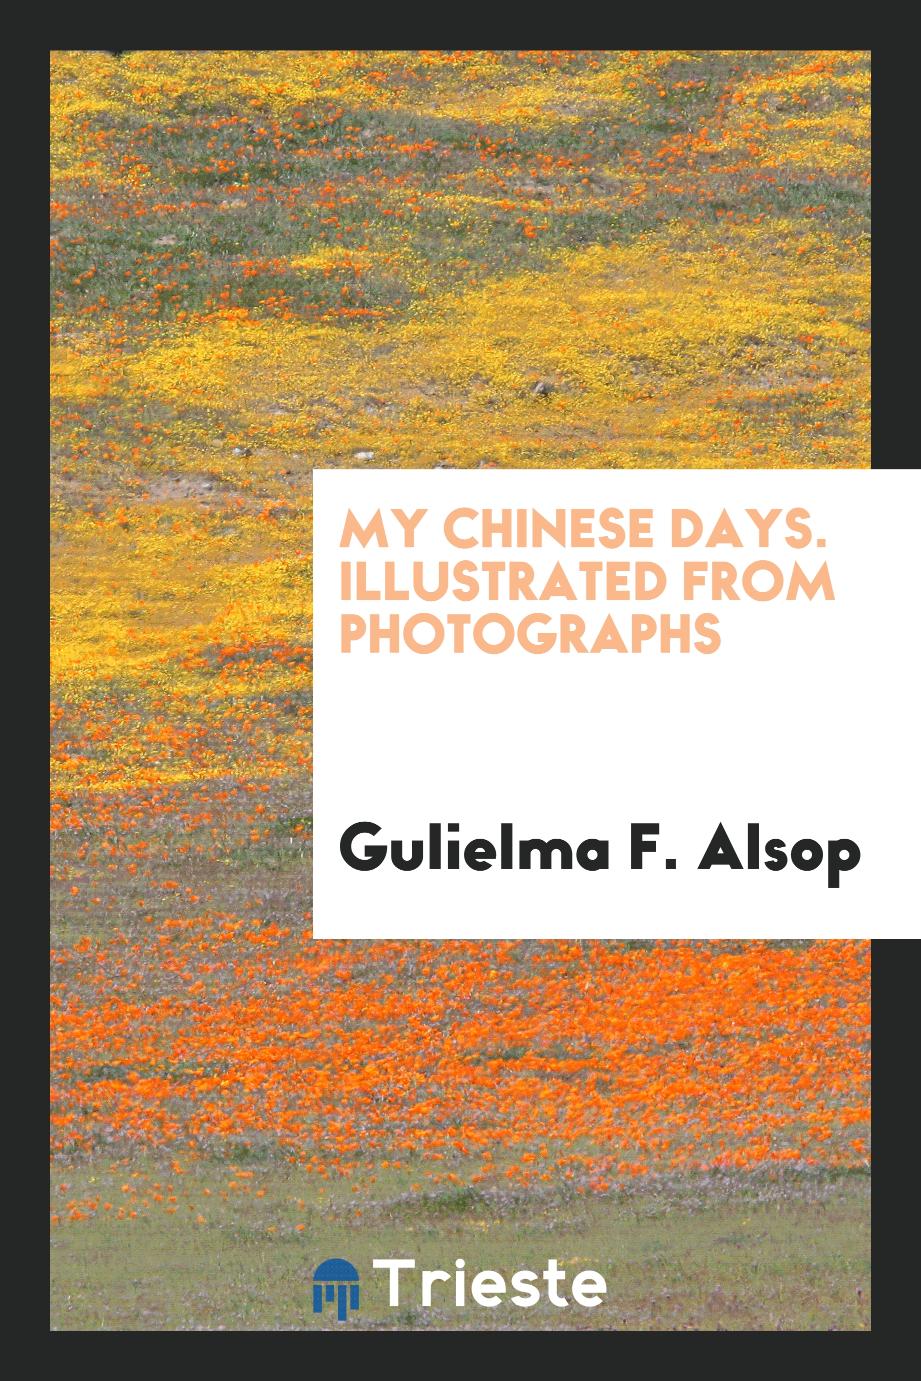 My Chinese Days. Illustrated from Photographs